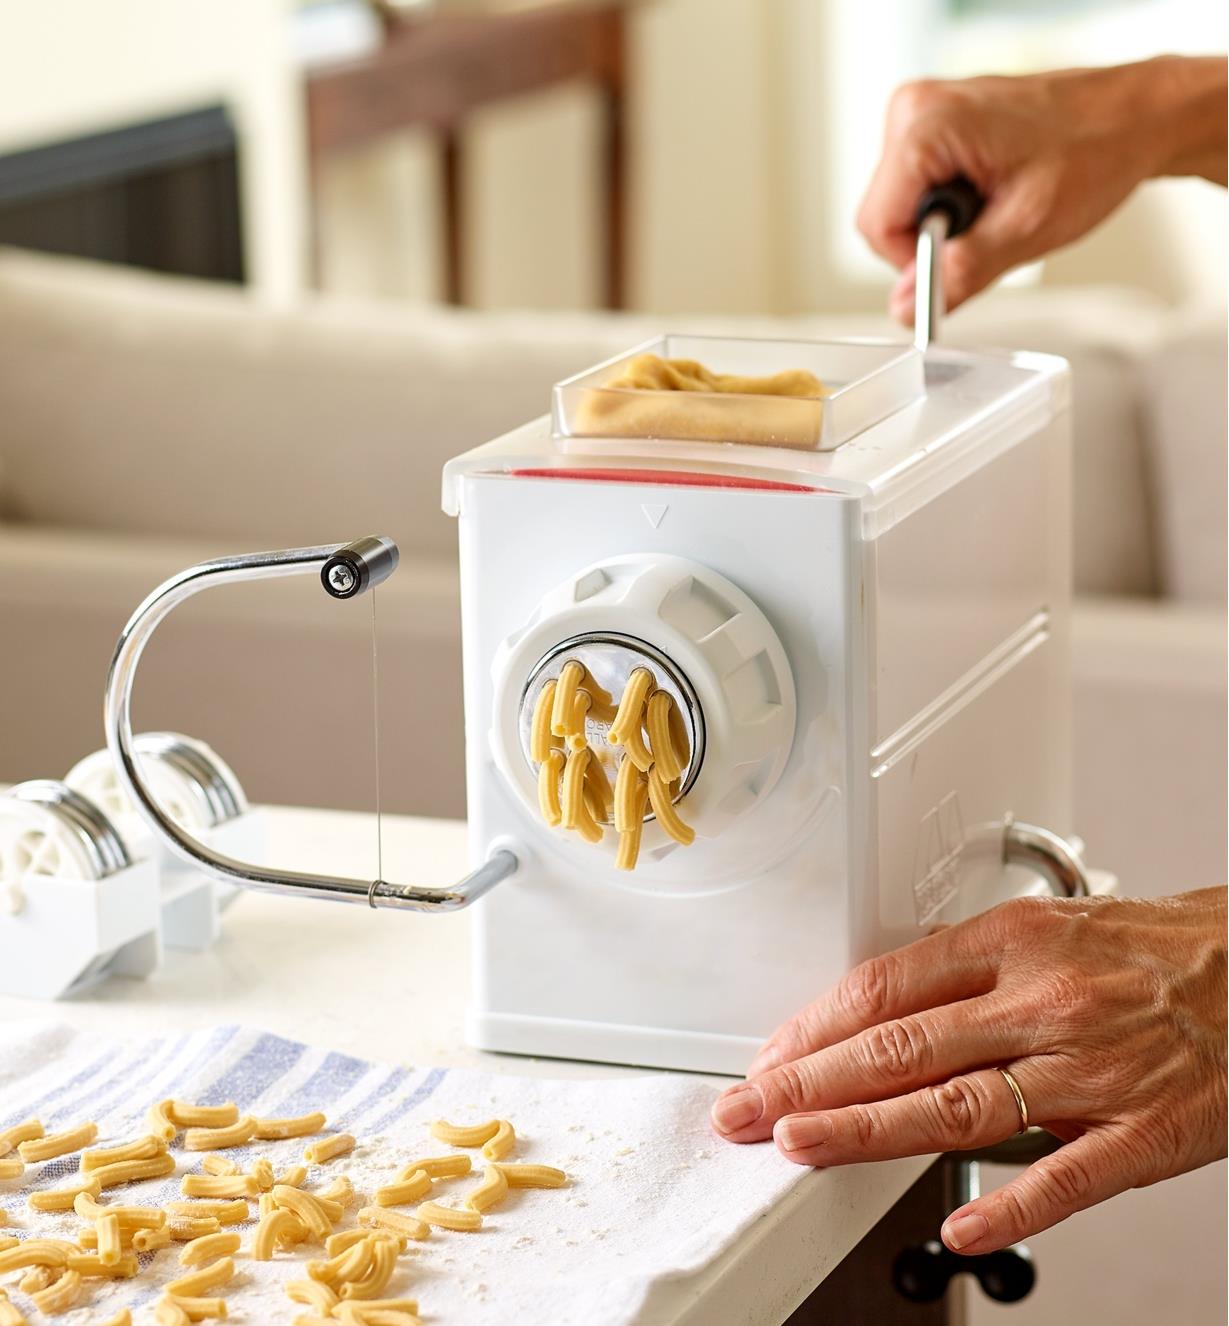 Fresh macaroni noodles being made with the Marcato pasta extruder